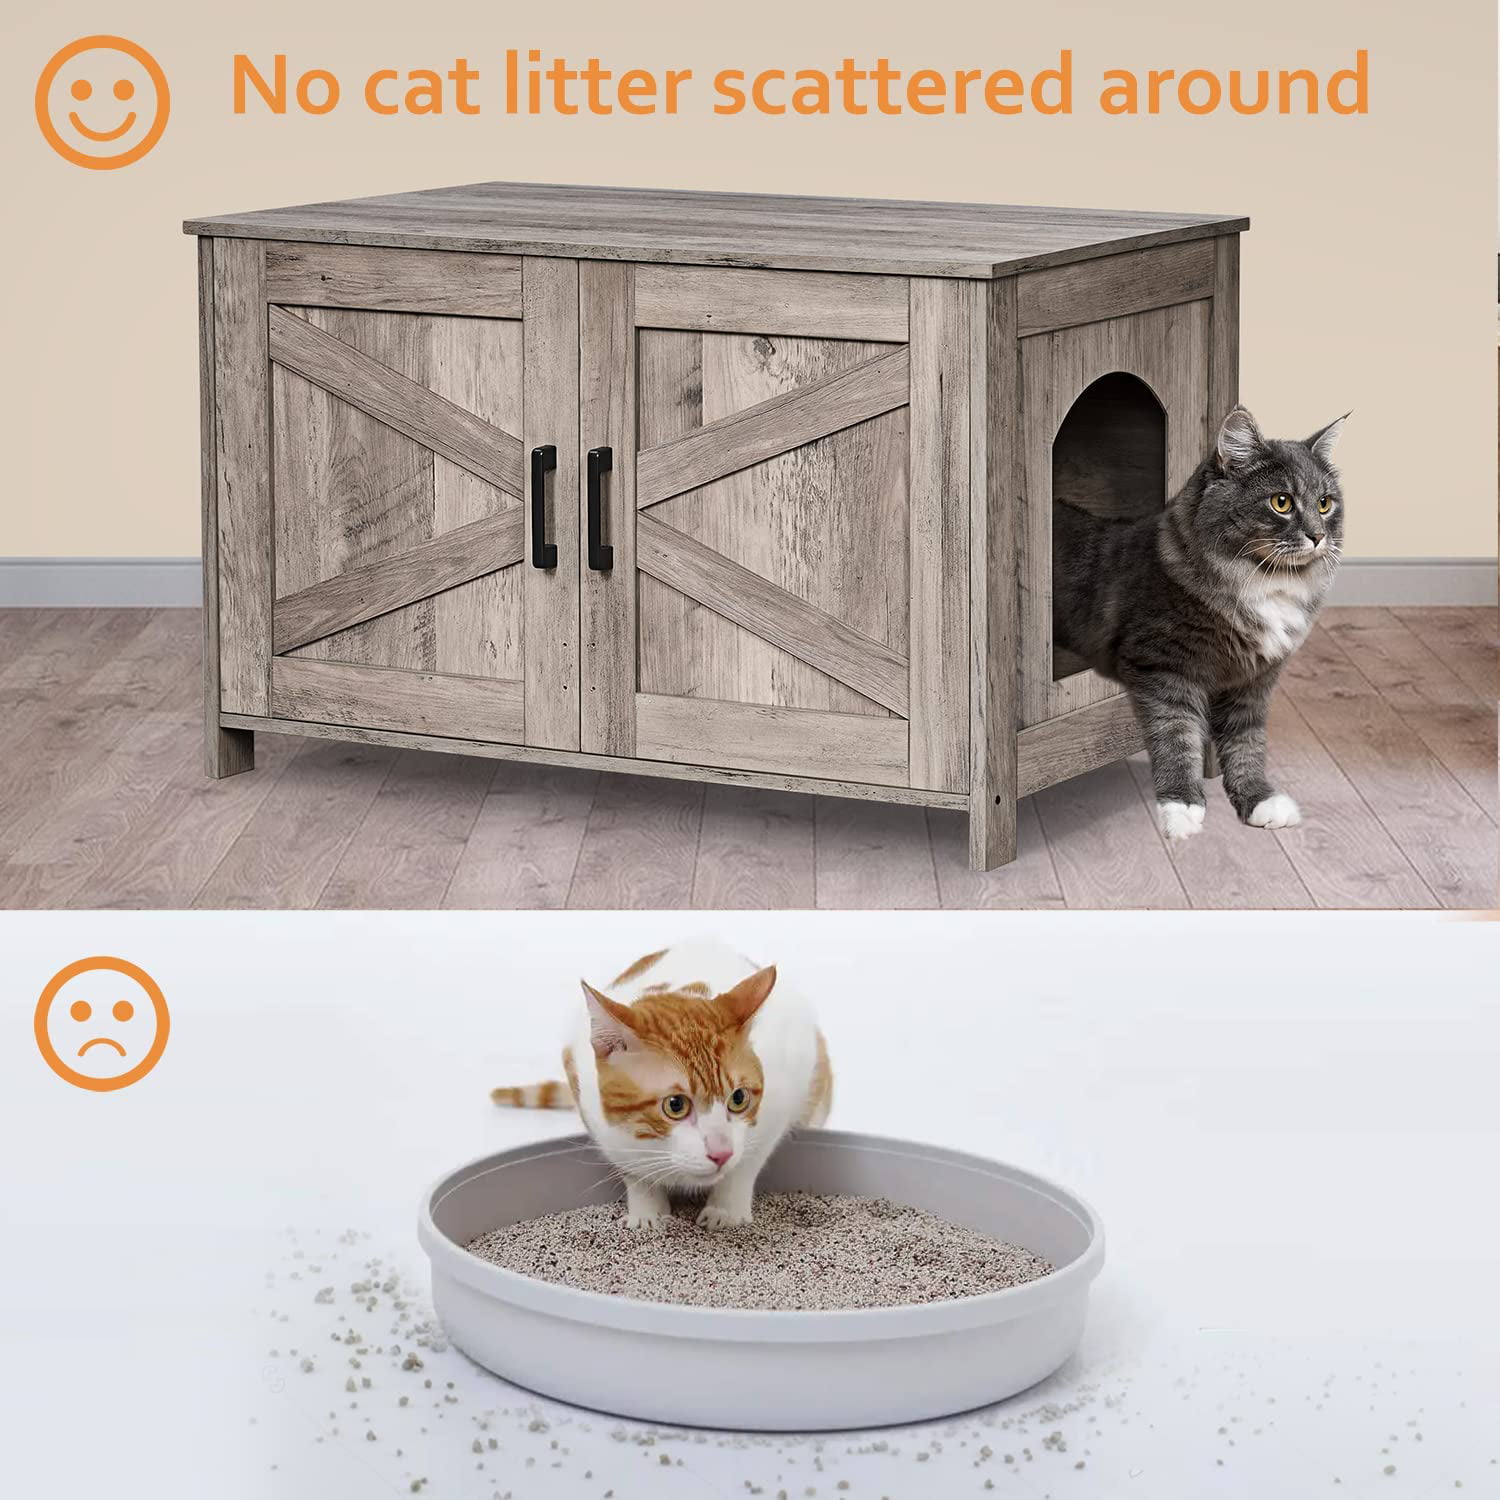 DINZI LVJ Litter Box Enclosure, Cat Litter House with Louvered Doors,  Entrance Can Be on Left or Right Side, Spacious Hidden Washroom for Most of  Box